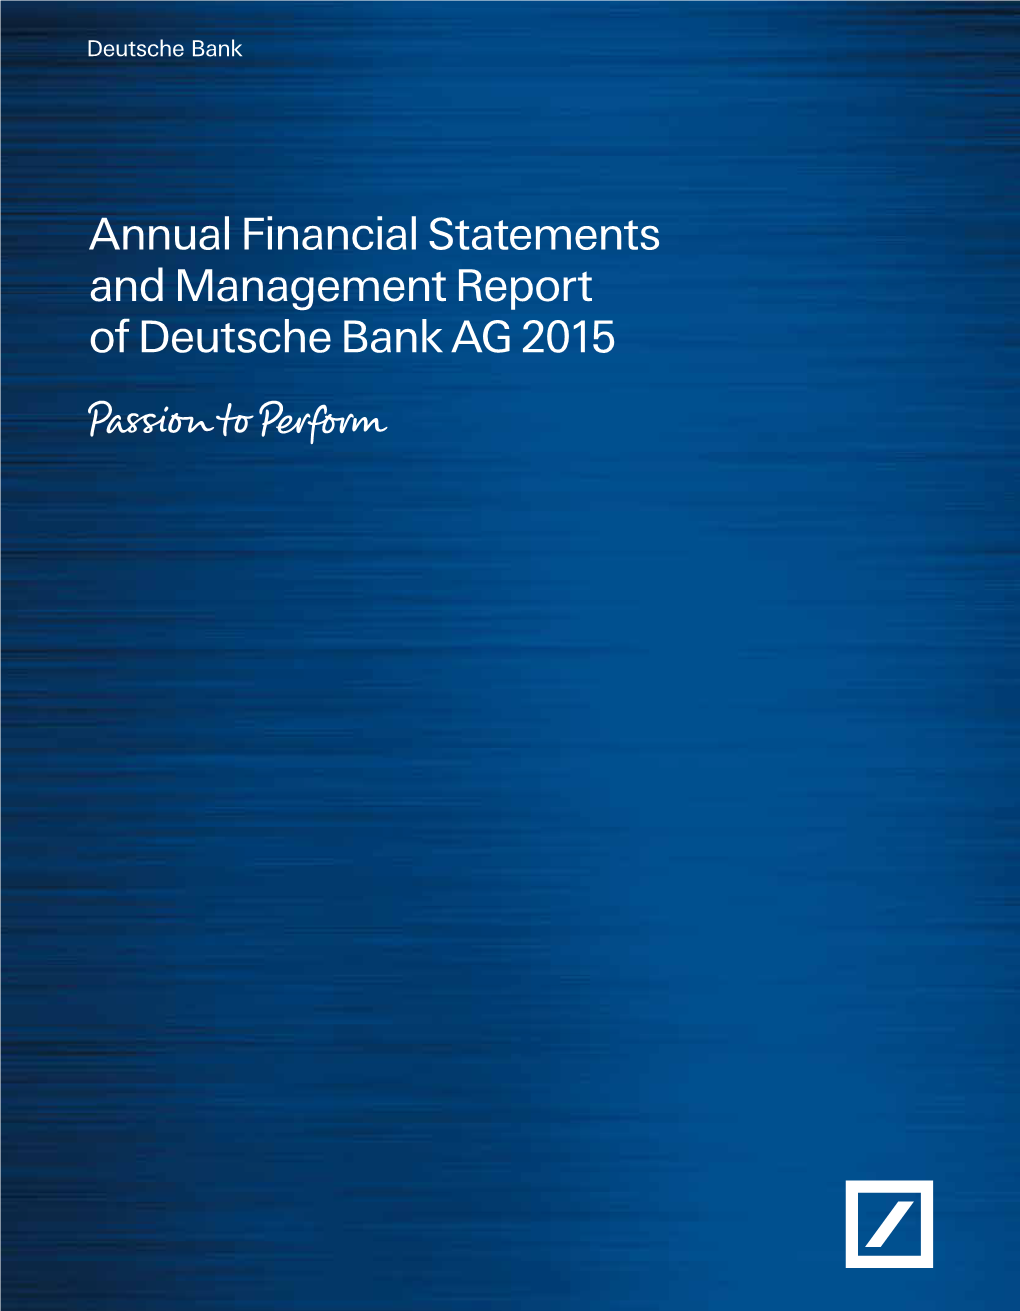 Annual Financial Statements and Management Report of Deutsche Bank AG 2015 of Deutsche Bank AG 2015 Managementand Report Statements Financial Annual